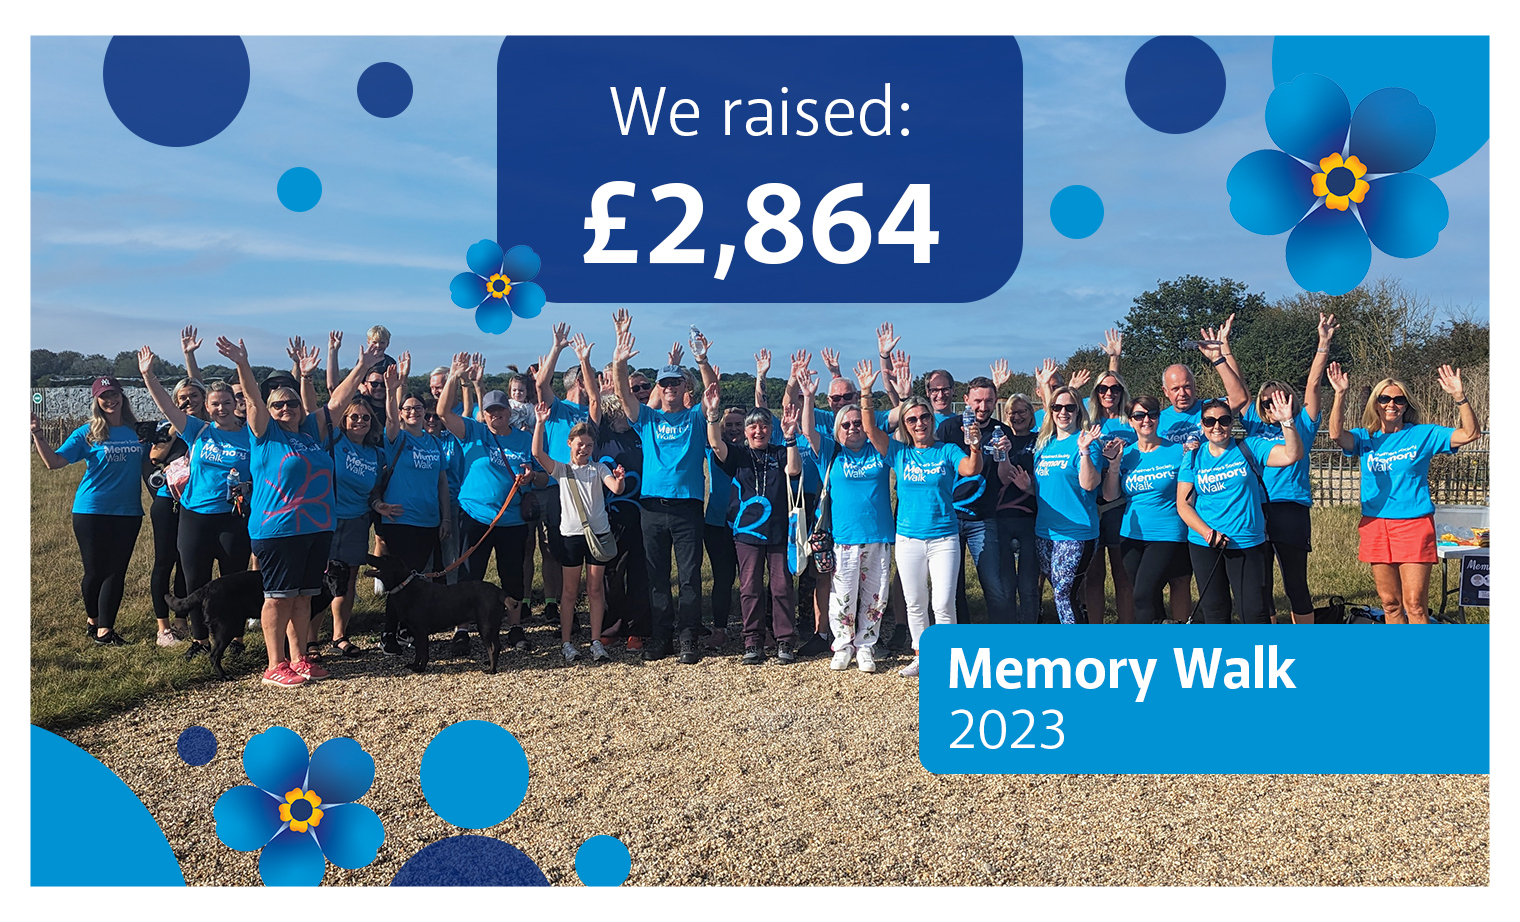 Prime Appointments staff wearing Blue Memory Walk T-shirts in aid of Alzheimers, Raising £2,864 for the event 2